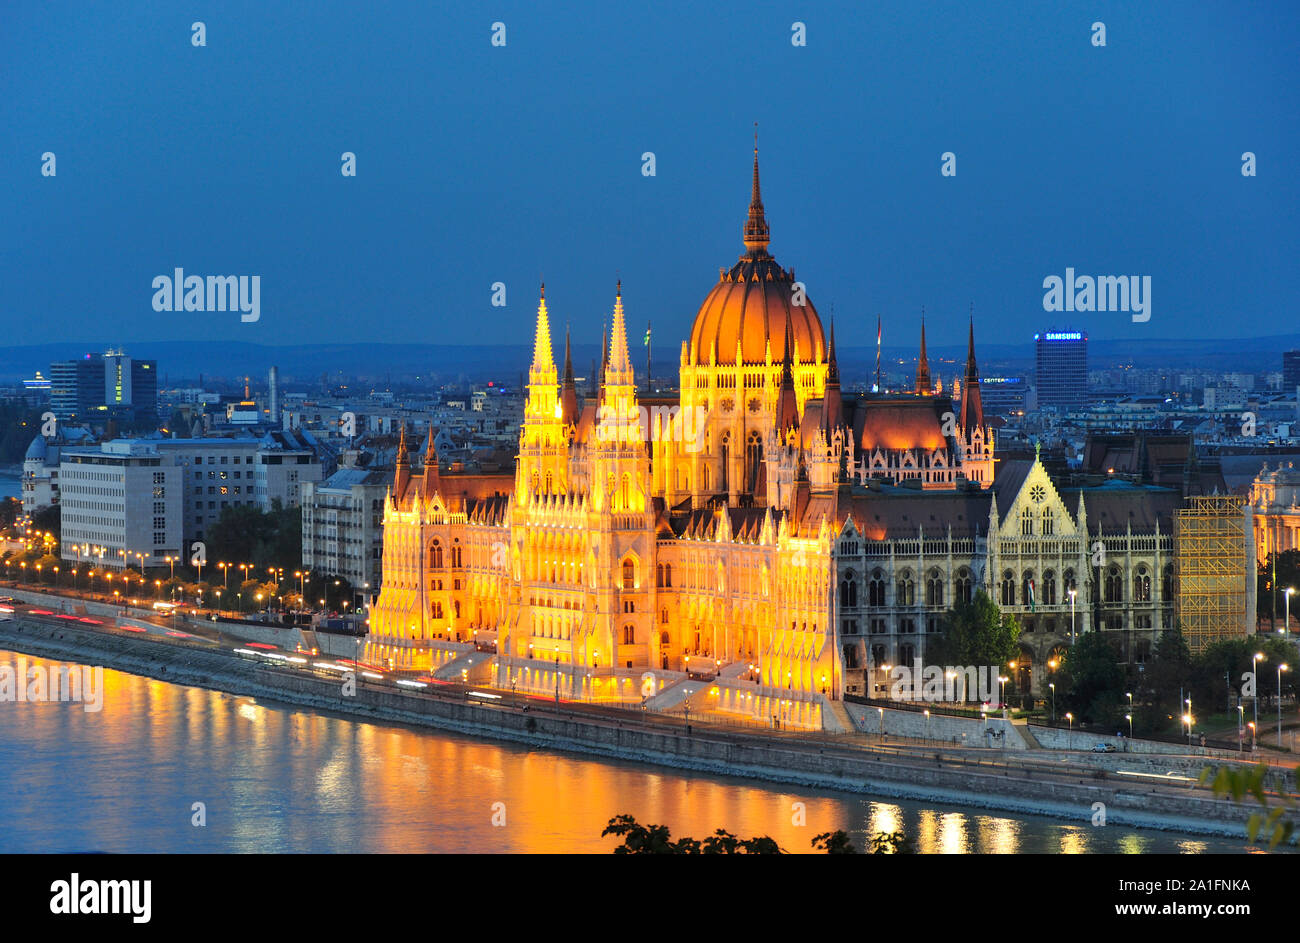 The Parliament at sunset, a UNESCO World Heritage Site. Budapest, Hungary Stock Photo